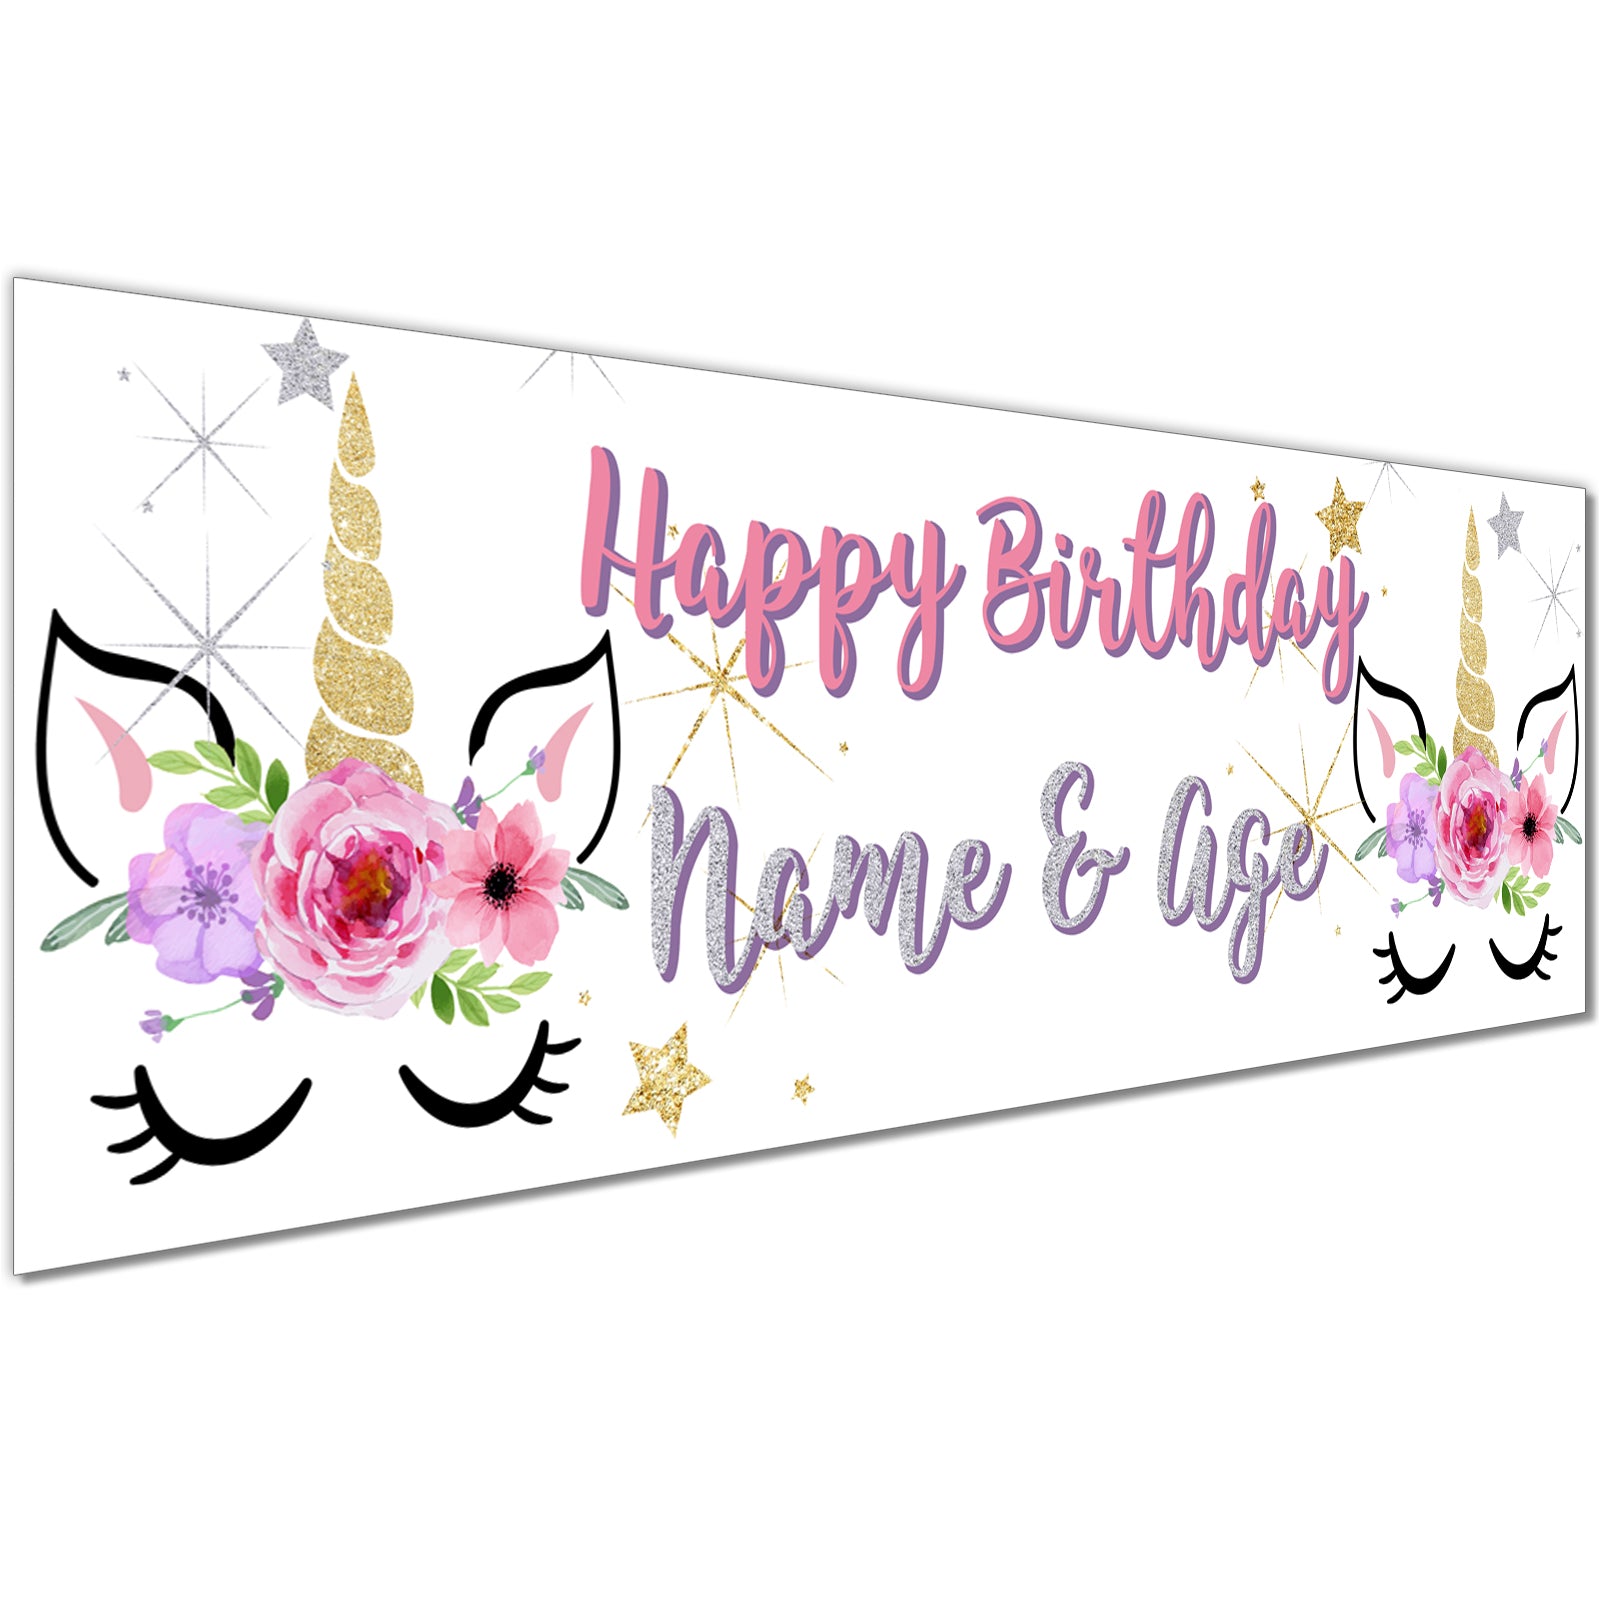 Kids Birthday Banners With Name in Pink Unicorn Butterfly Design